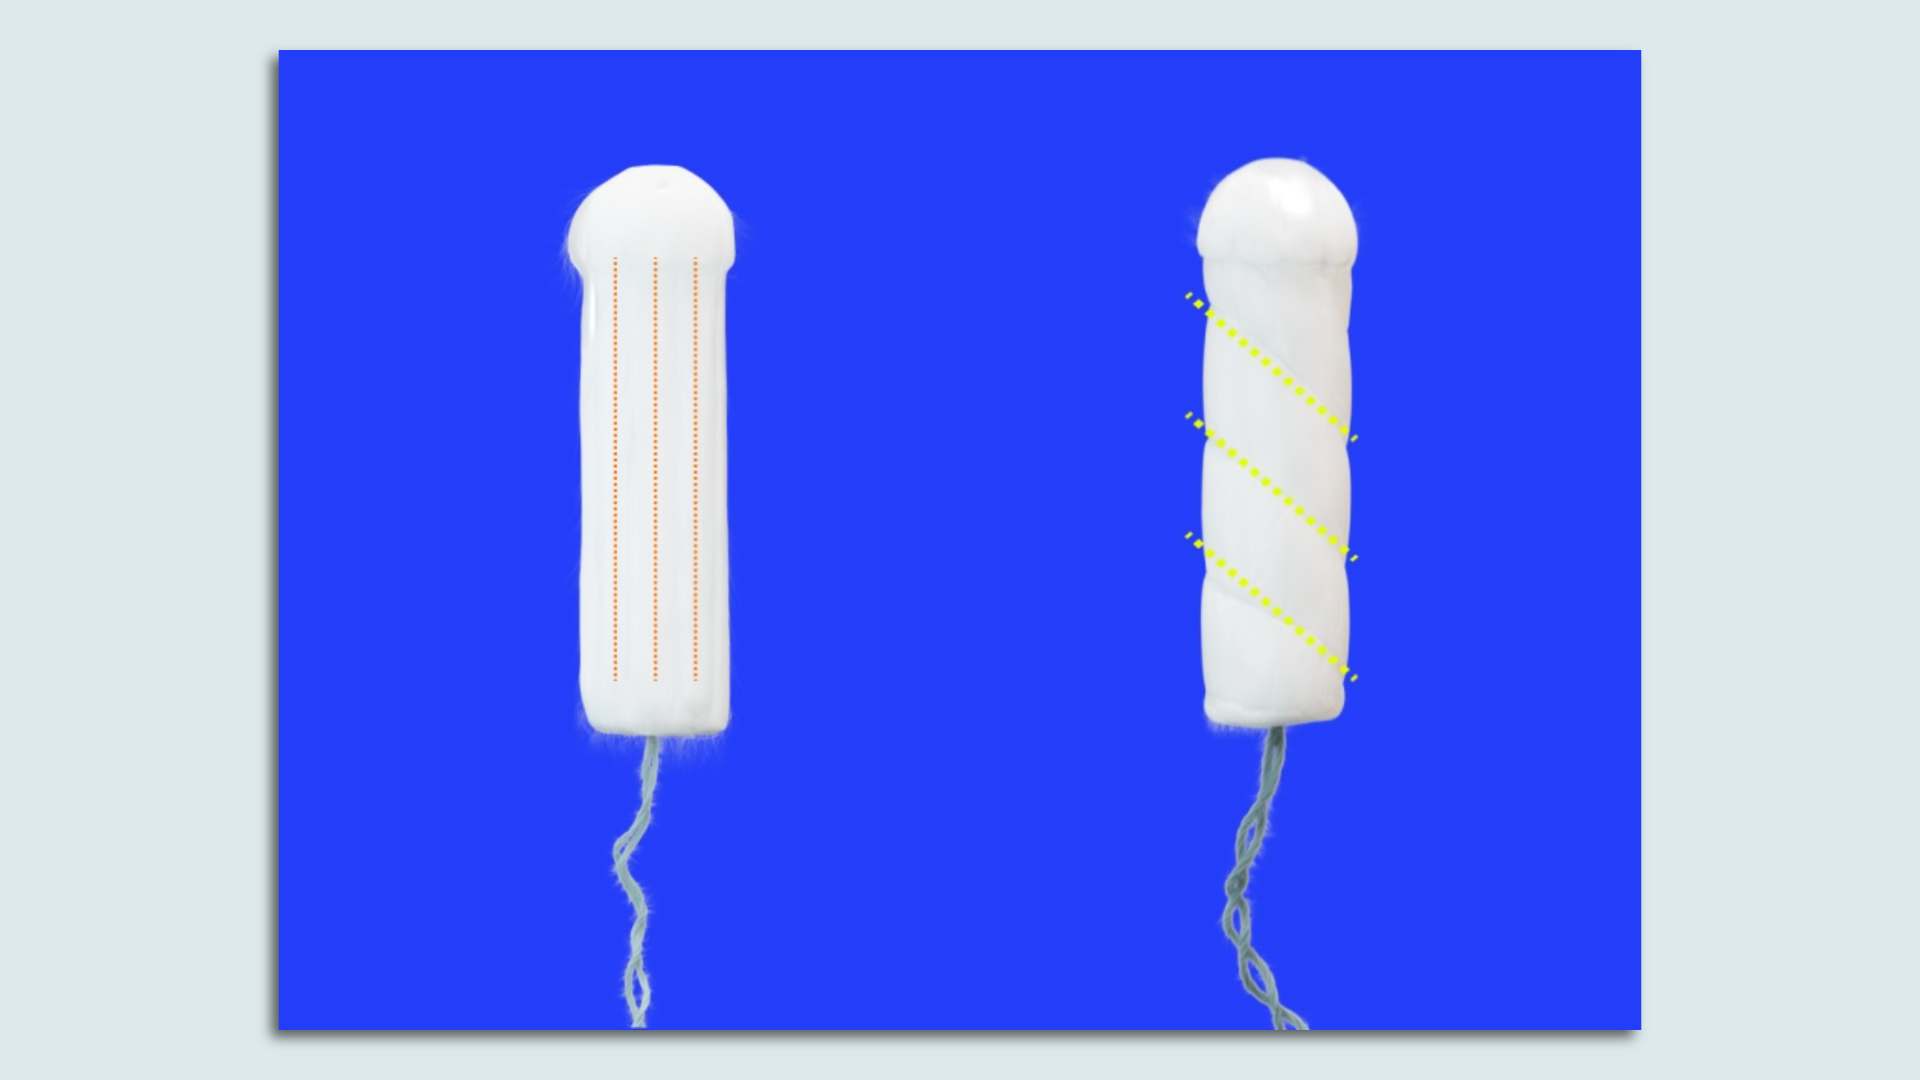 The quest for a better tampon comes as women’s sports surge